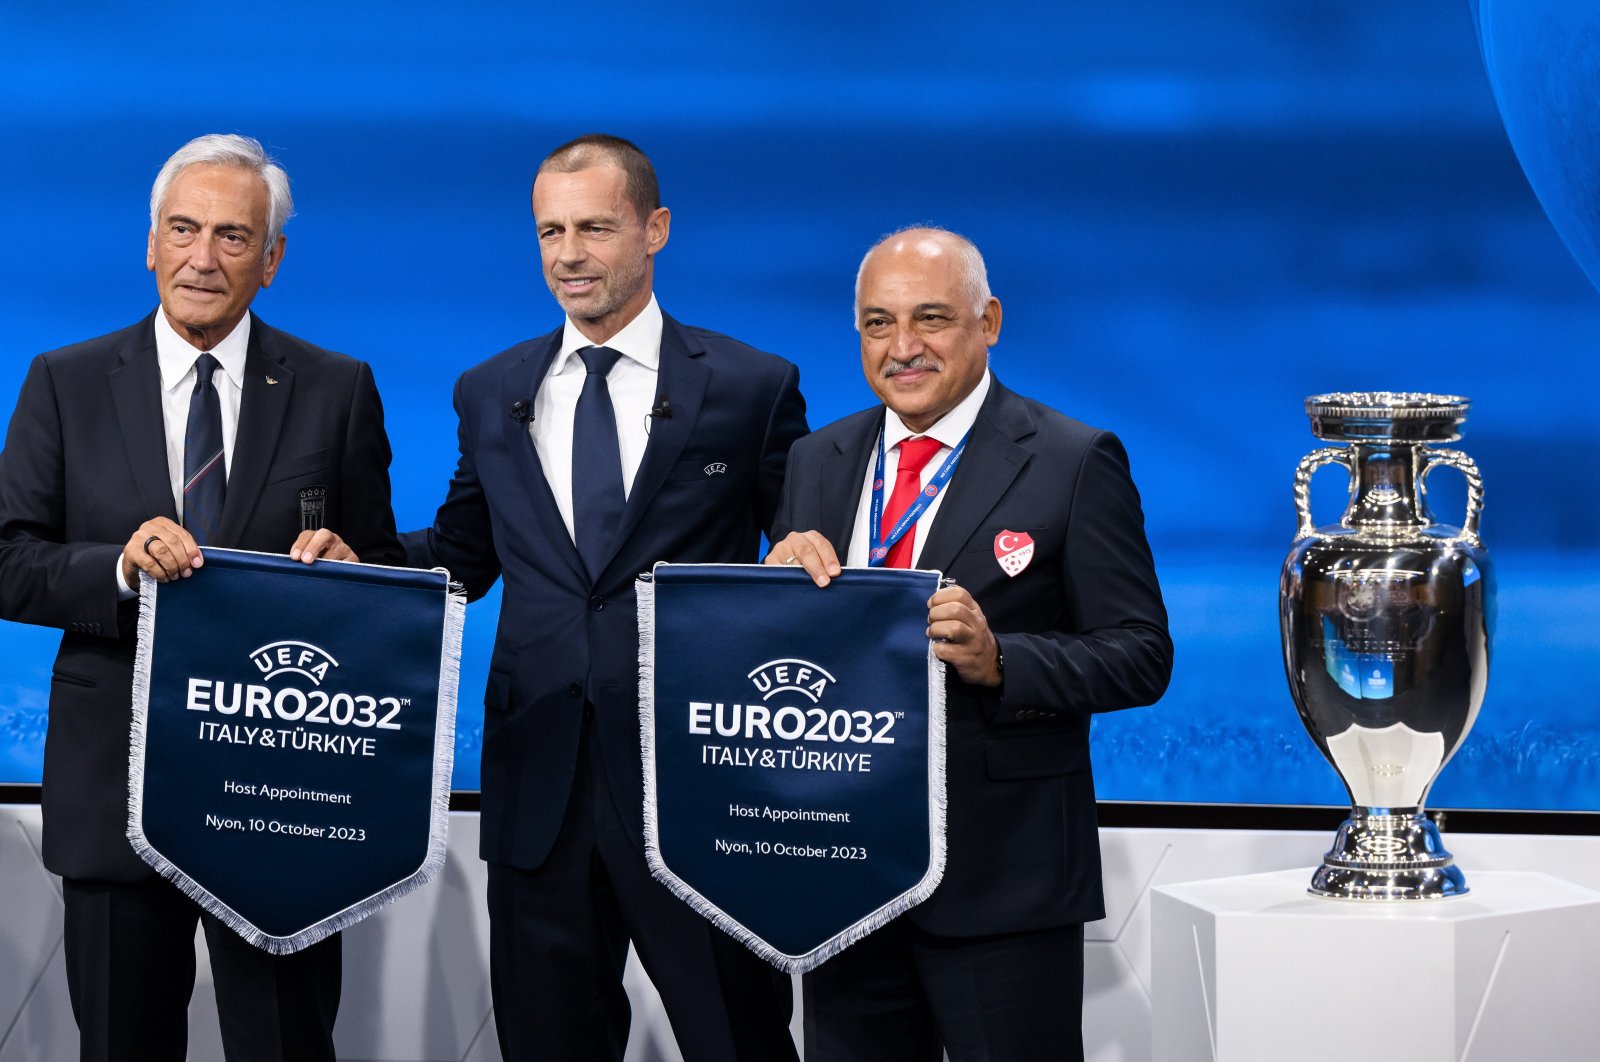 UEFA President Aleksander Ceferin (C) shows the name of Italy and Türkiye elected to host the Euro 2032 fooball tournament with Gabriele Gravina (L), president of the Italian Football Federation (FIGC) and Mehmet Büyükekşi (R), president of the Turkish Football Federation (TFF) during the the UEFA EURO 2028 and 2032 hosts announcement ceremony after the UEFA Executive Committee meeting at its headquarters, Nyon, Switzerland, Oct. 10, 2023. (EPA Photo)